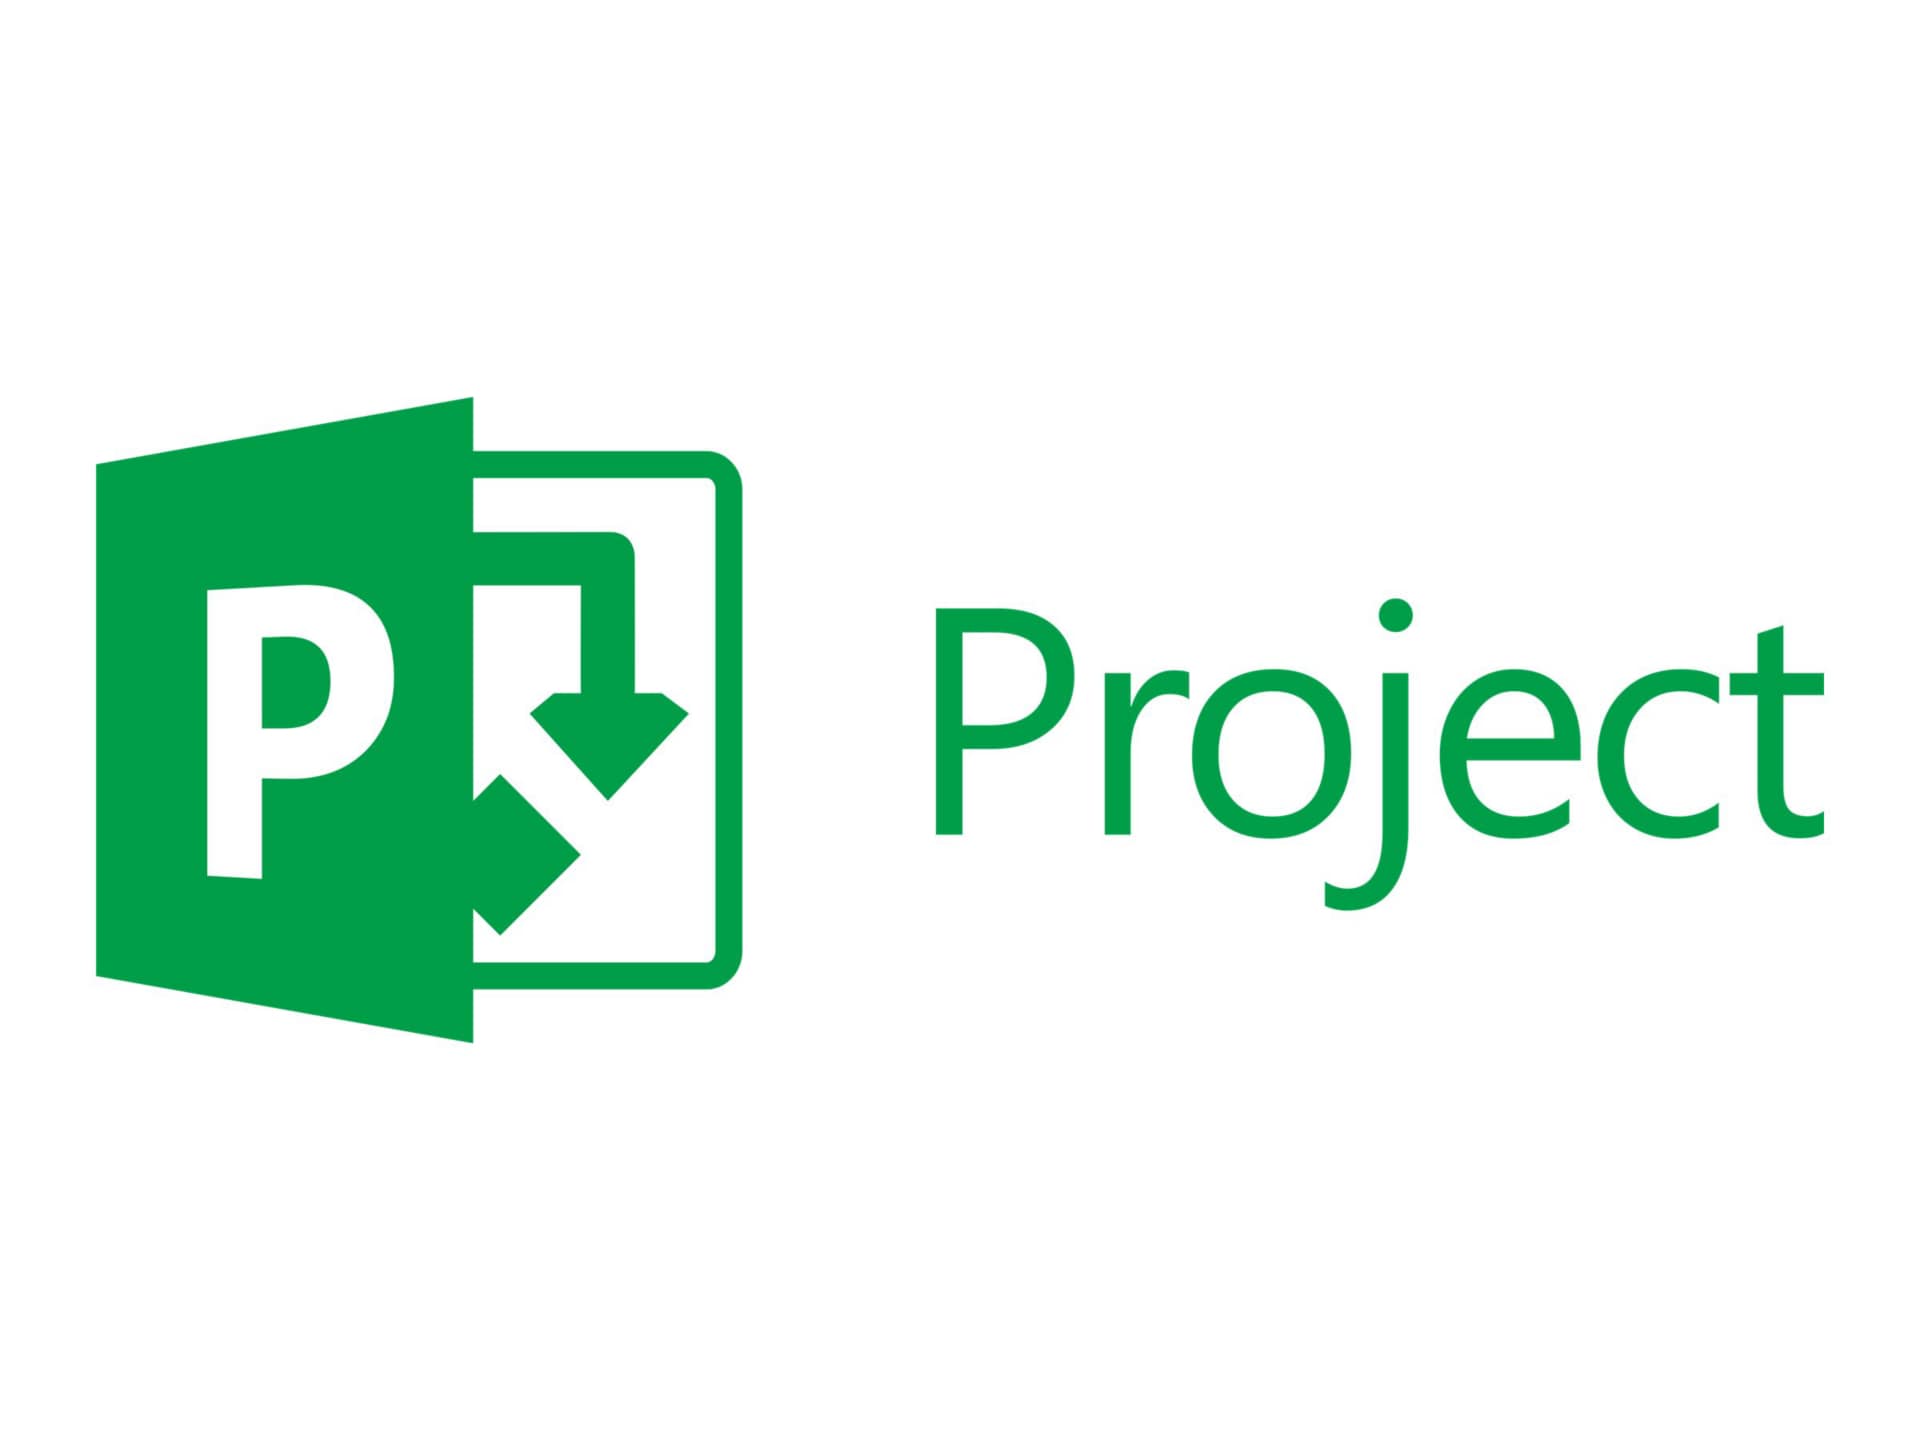 Microsoft Project Online Professional Add-on - subscription license (1 mont